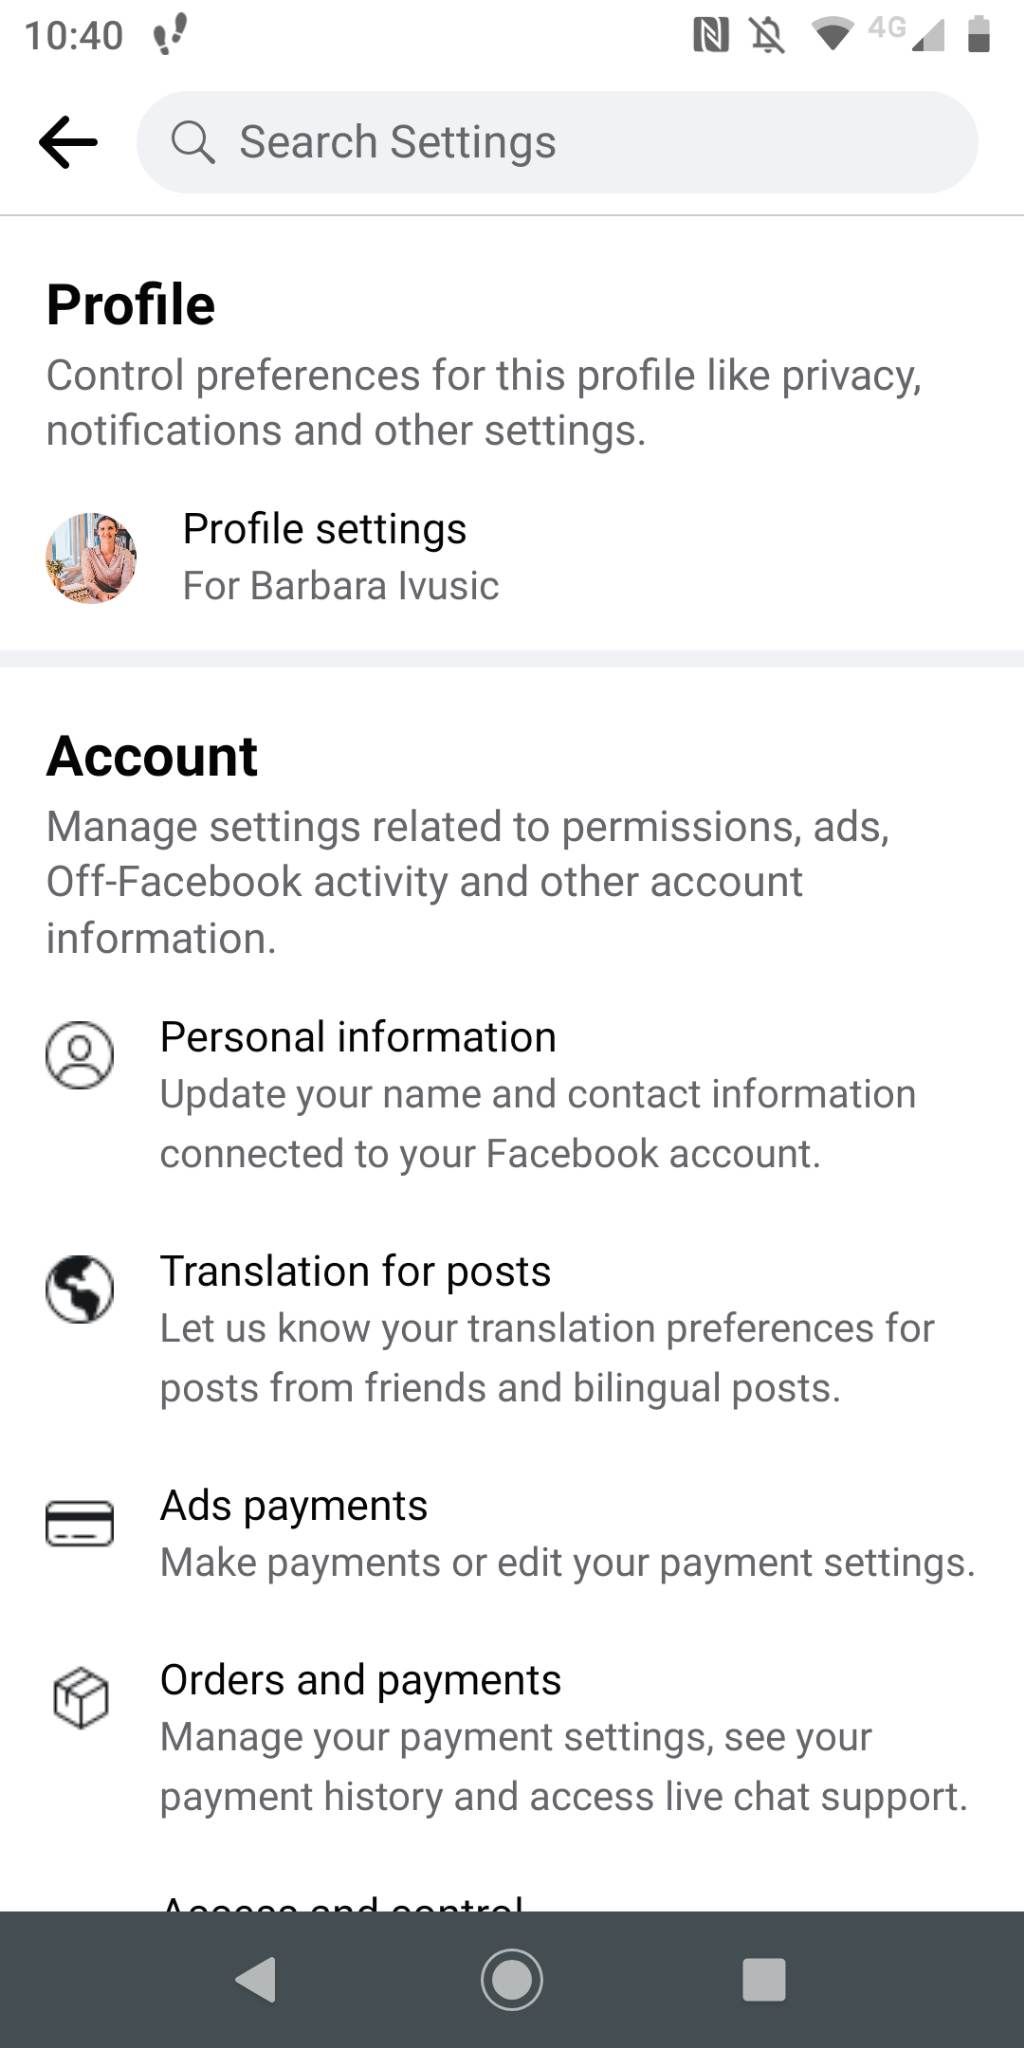 Facebook privacy settings home screen